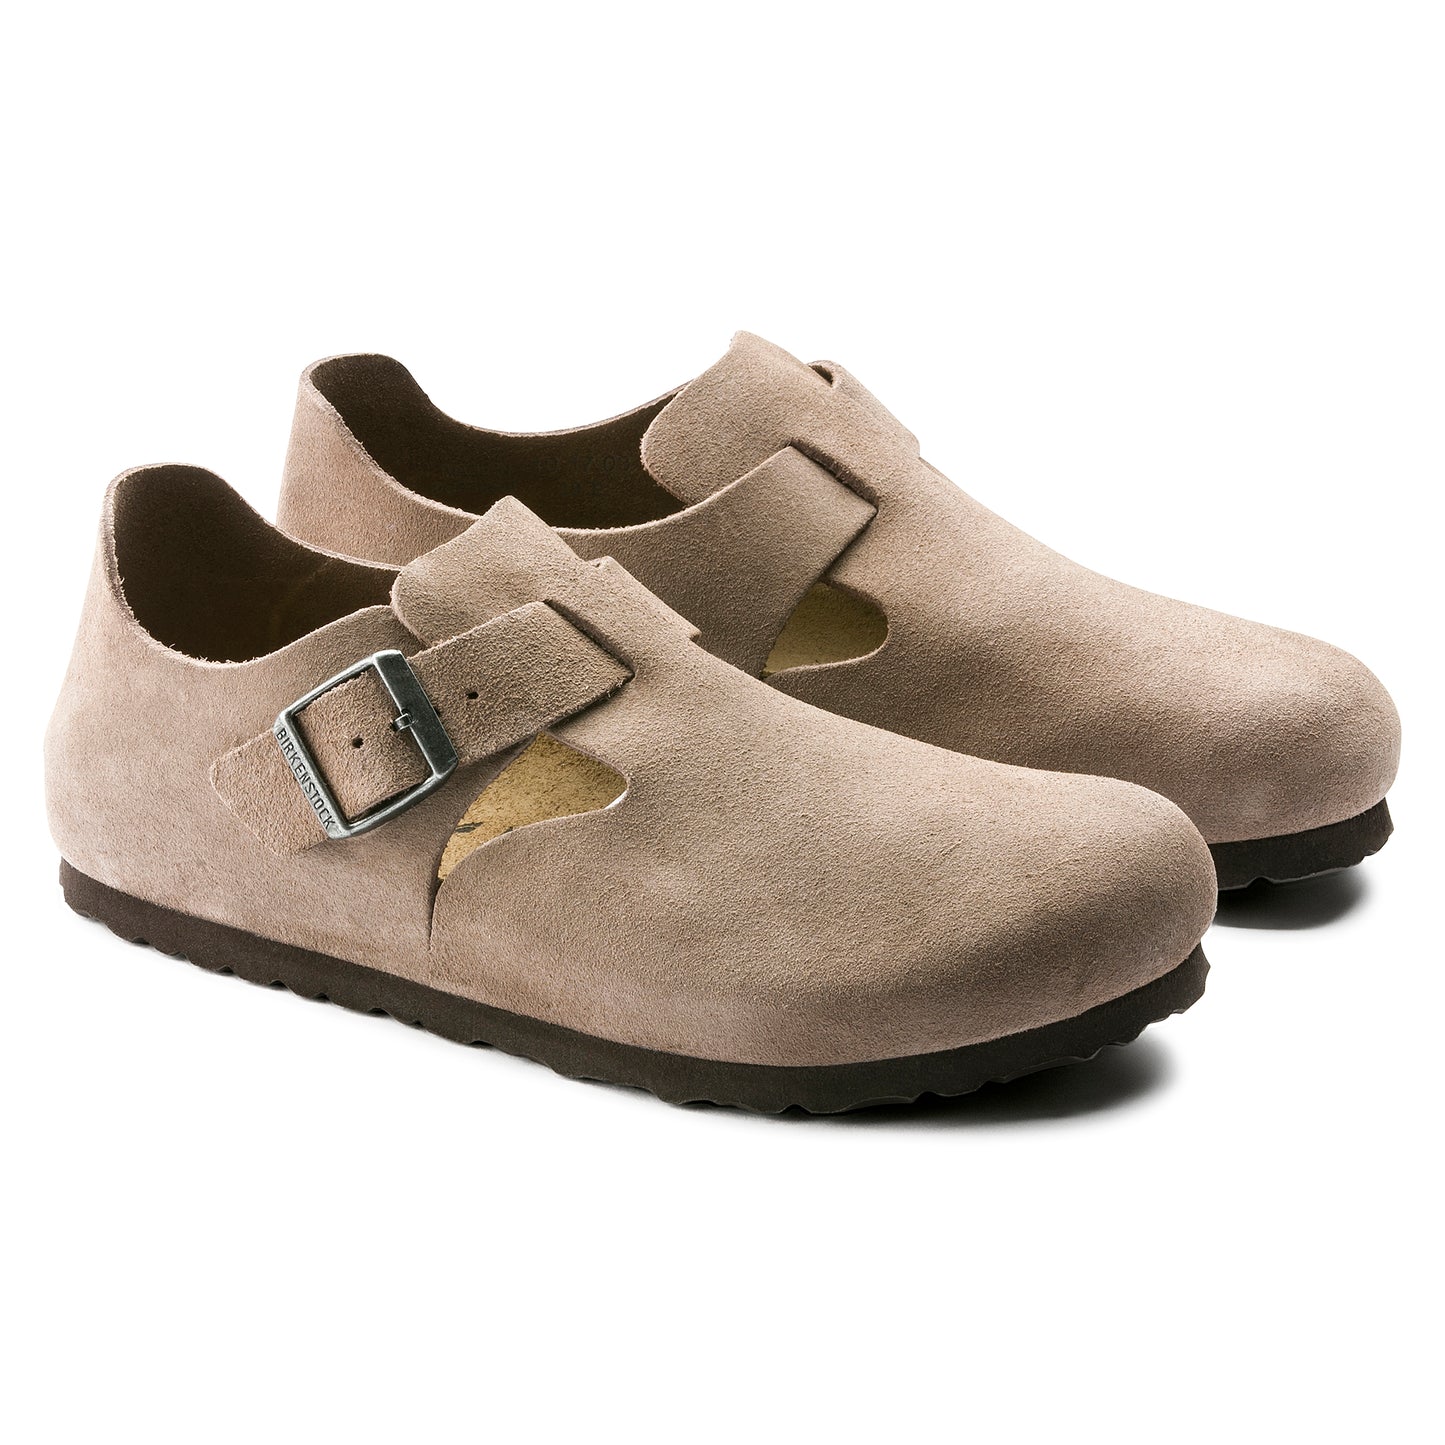 London Mens Leather Suede